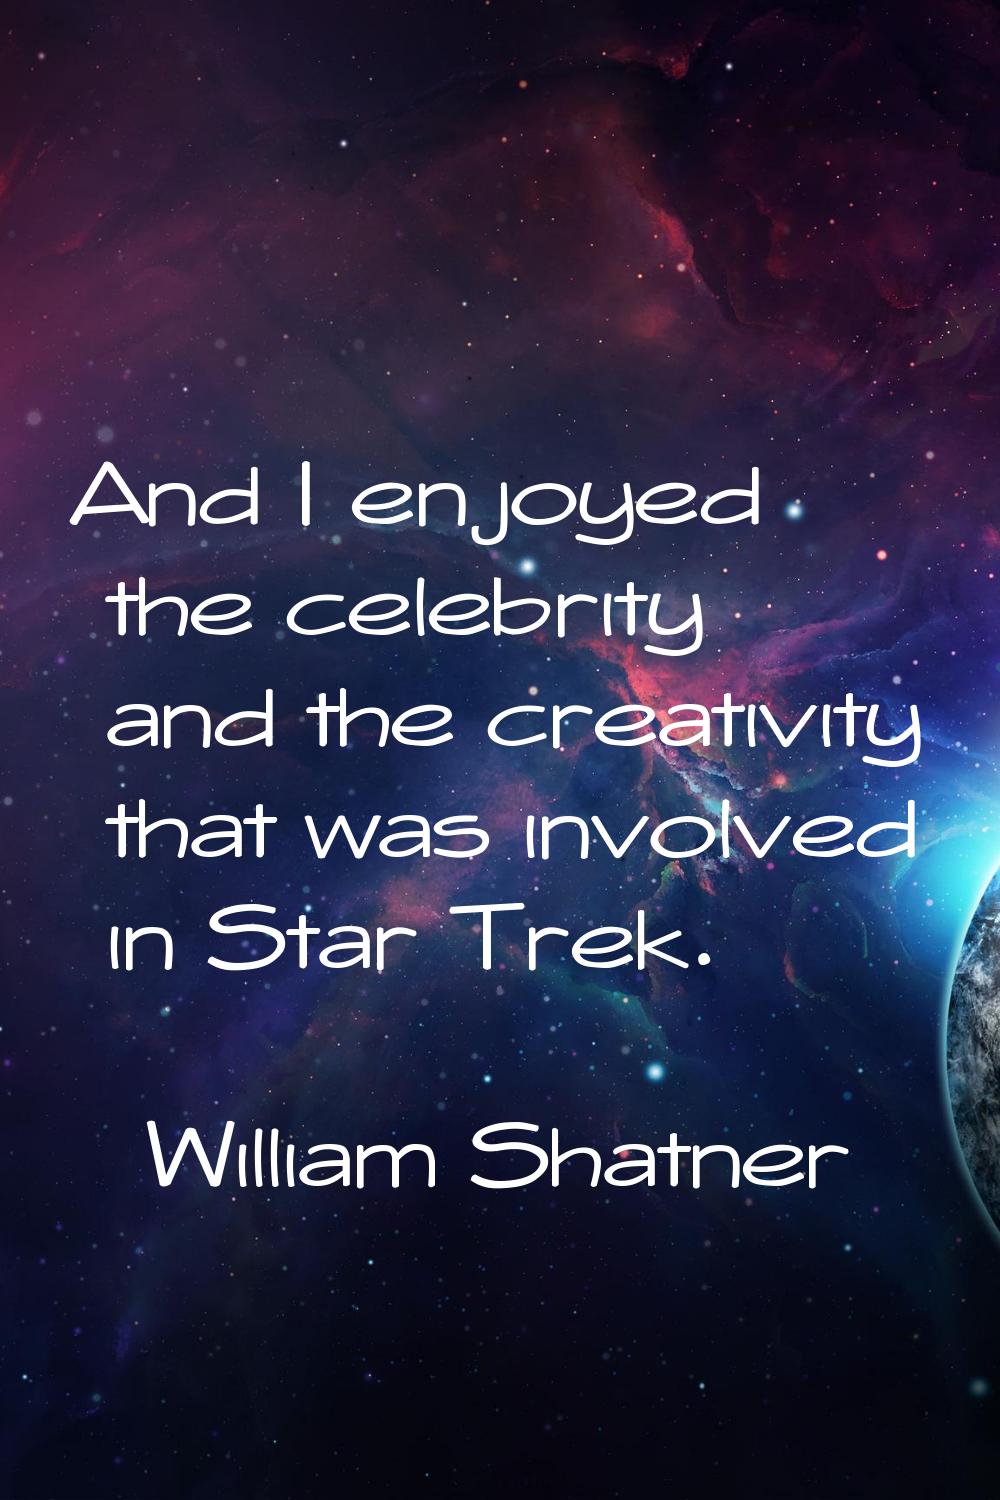 And I enjoyed the celebrity and the creativity that was involved in Star Trek.